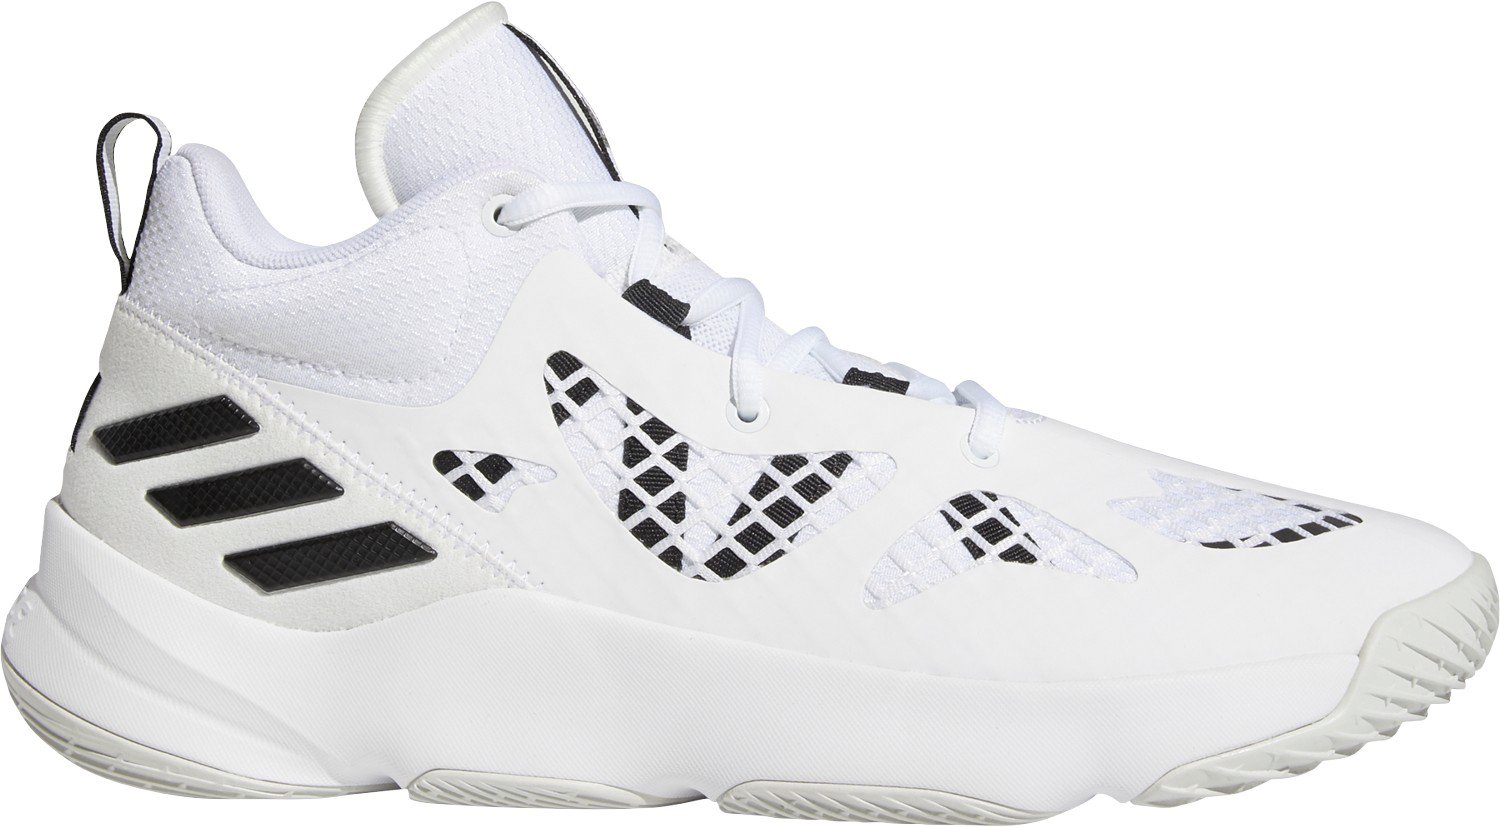 Adults' Pro Basketball Shoes | Academy